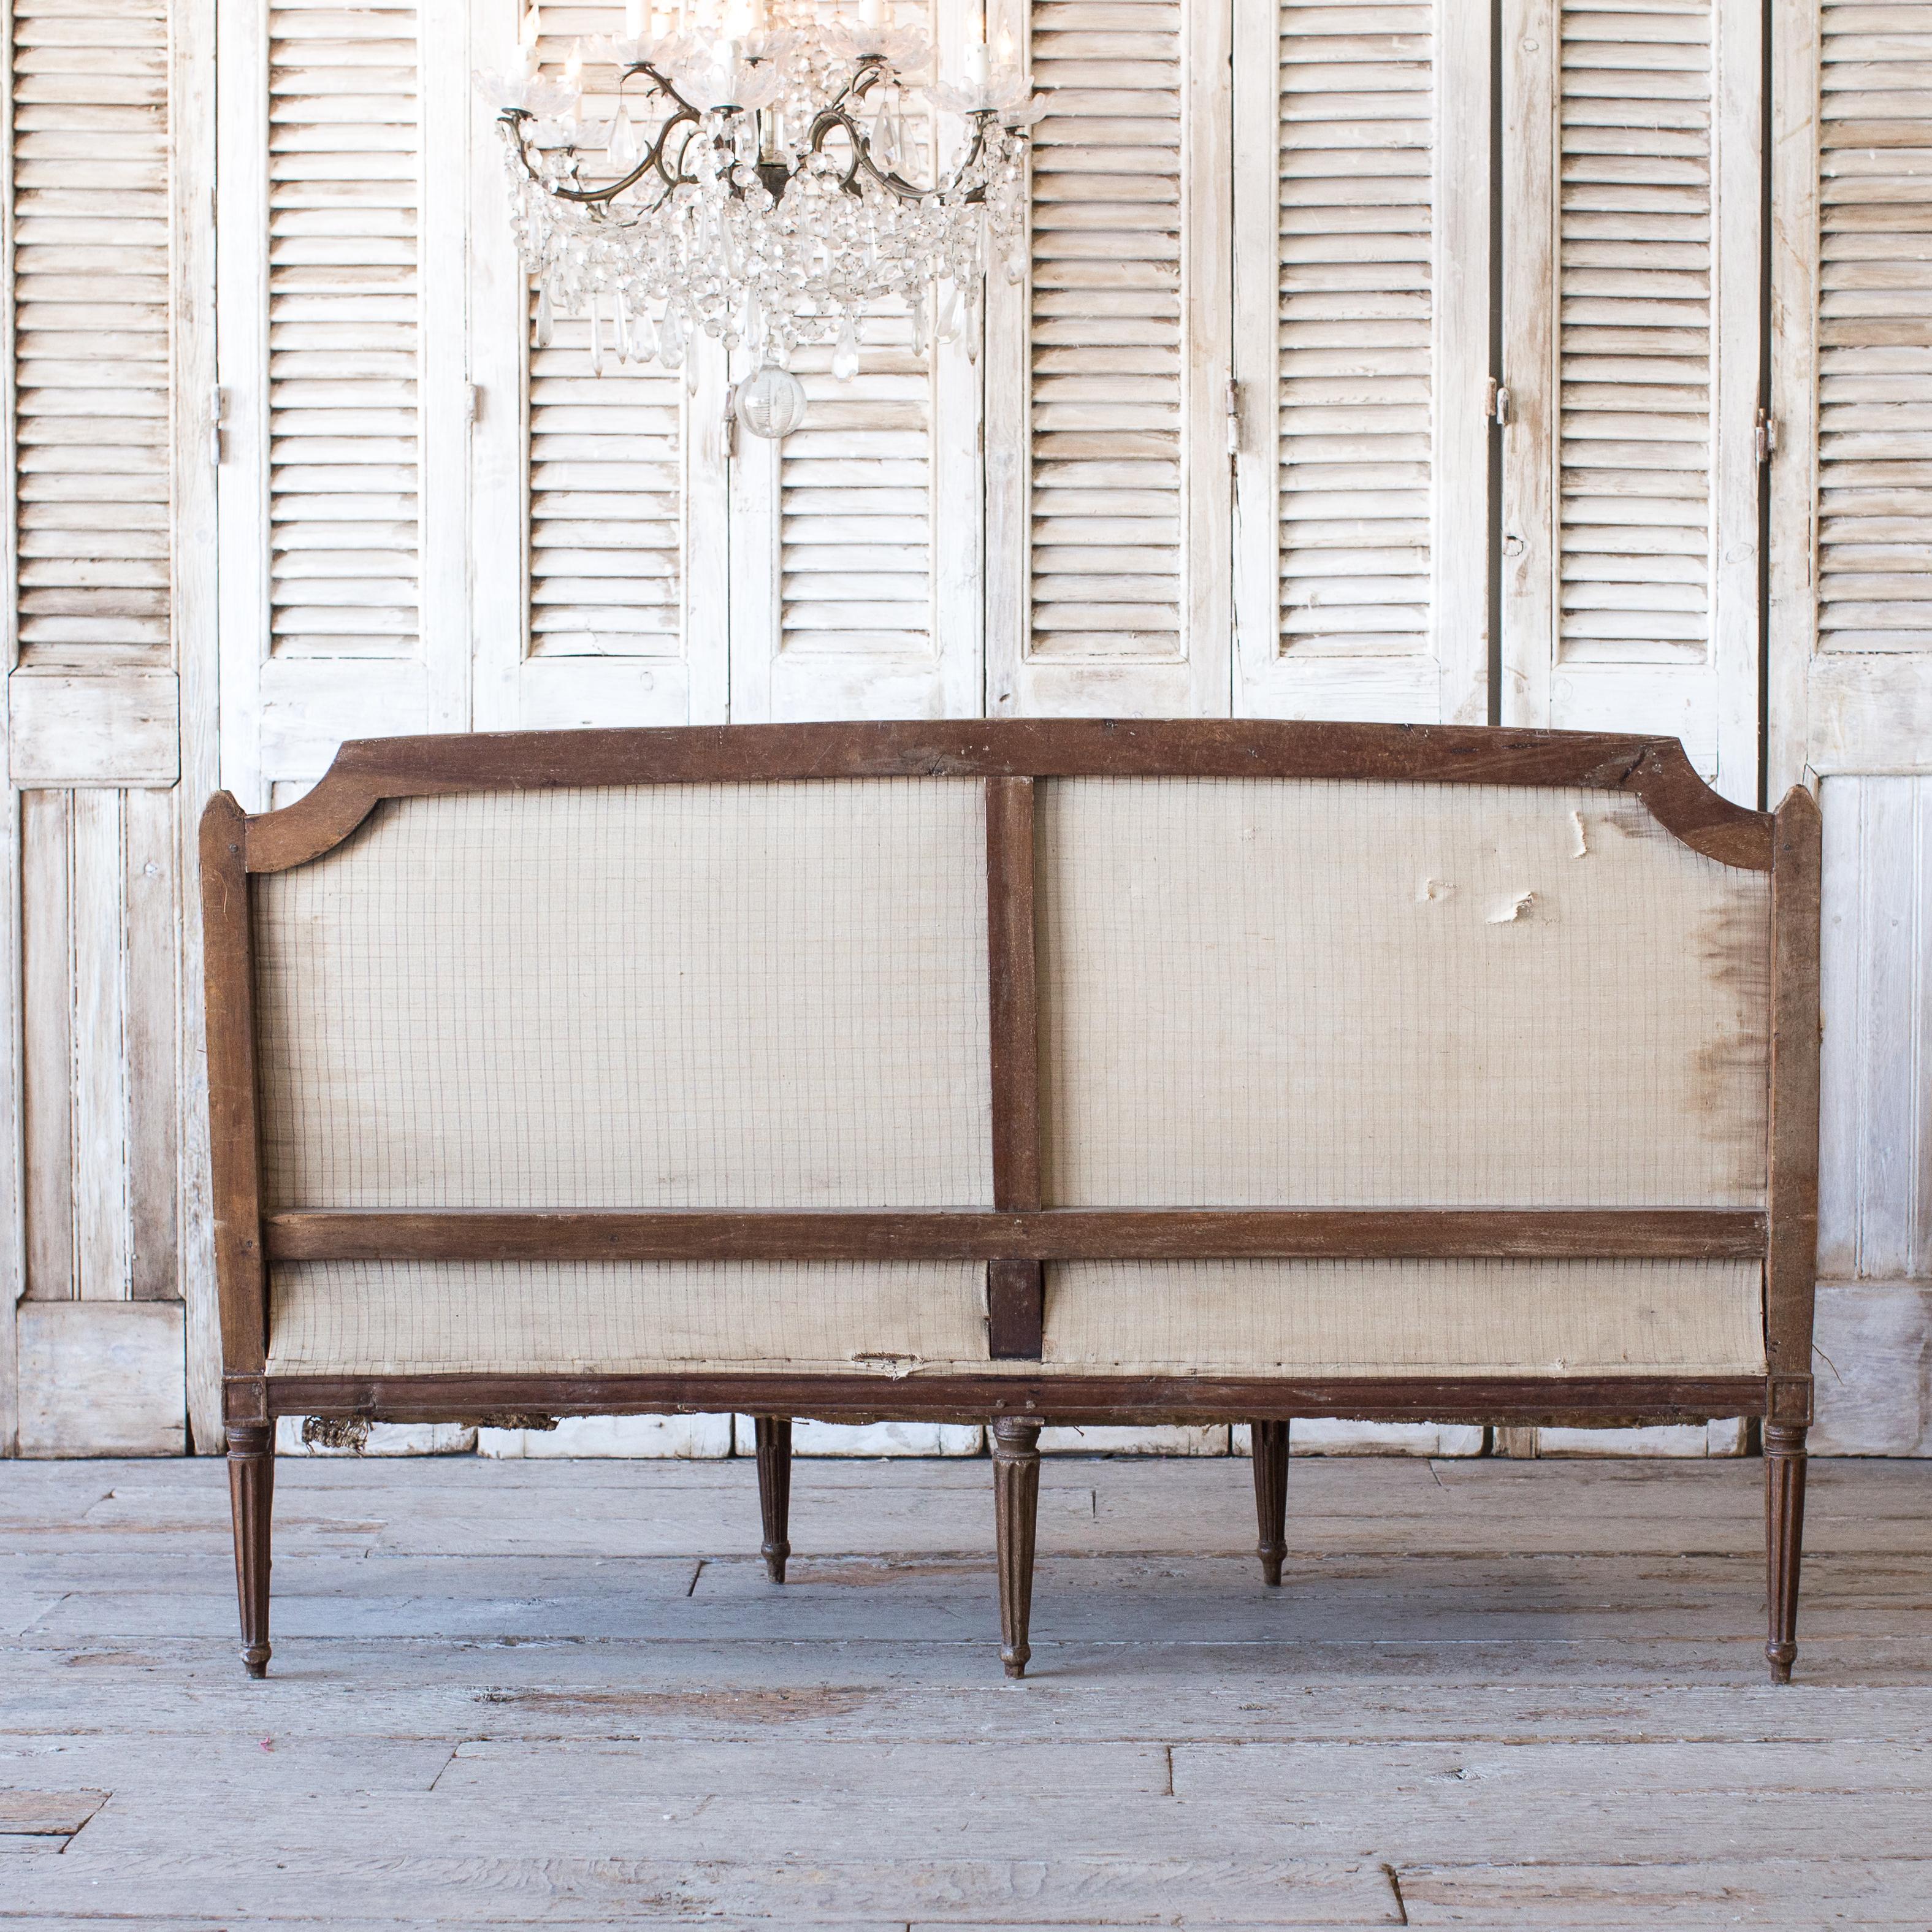 Handsome antique settee sourced in France. This piece boasts a deep brown stain finish with deconstructed cloth. The original muslin underneath and burlap sides give this finely carved frame a rugged feel.